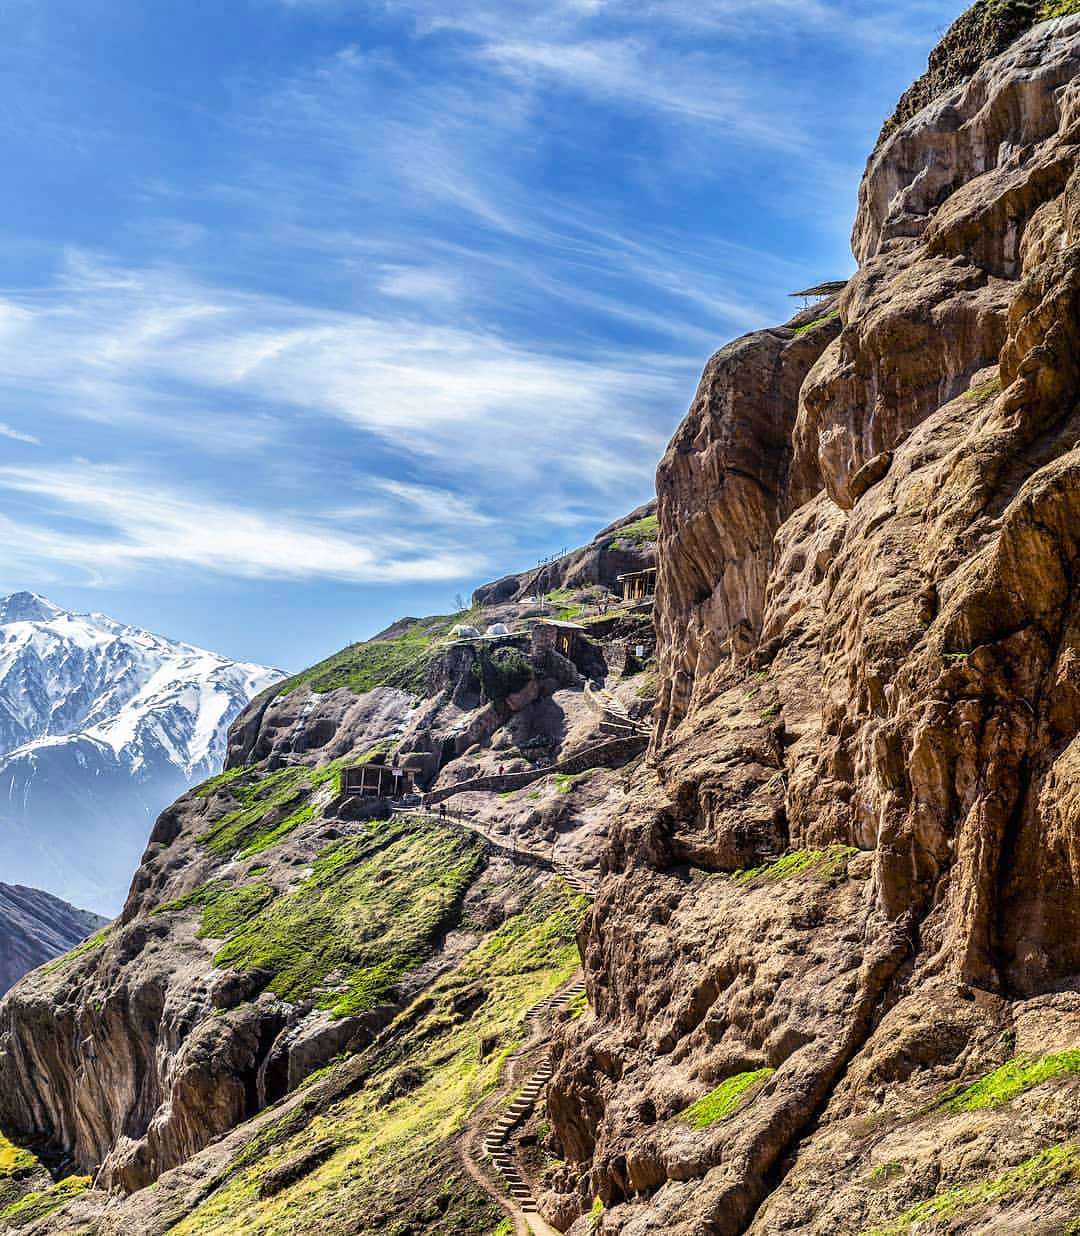 The Legendary Tour of the Alamut Castle & Alamut Valley